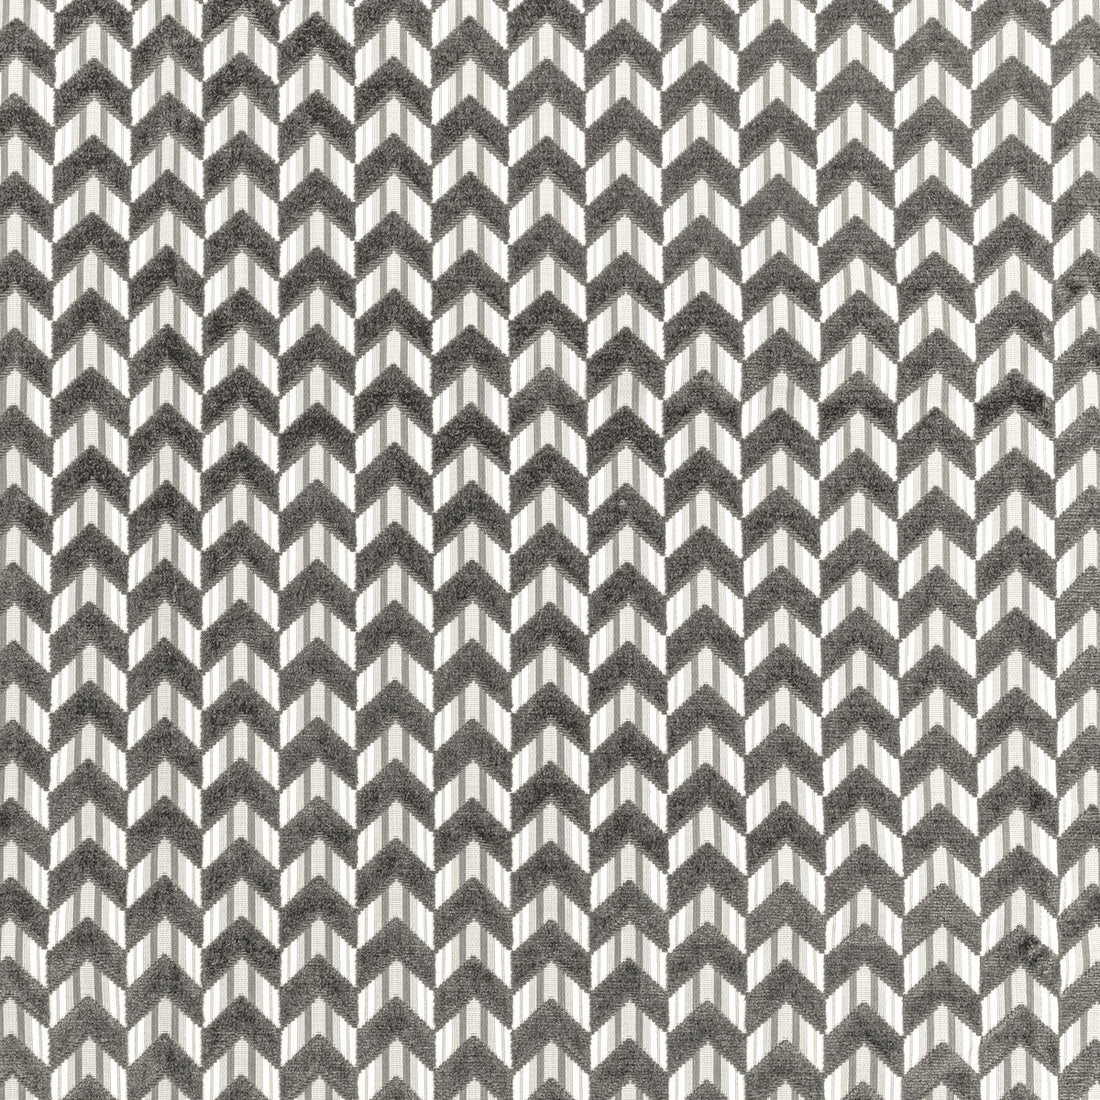 Bailey Velvet fabric in grey color - pattern 2020207.11.0 - by Lee Jofa in the Breckenridge collection